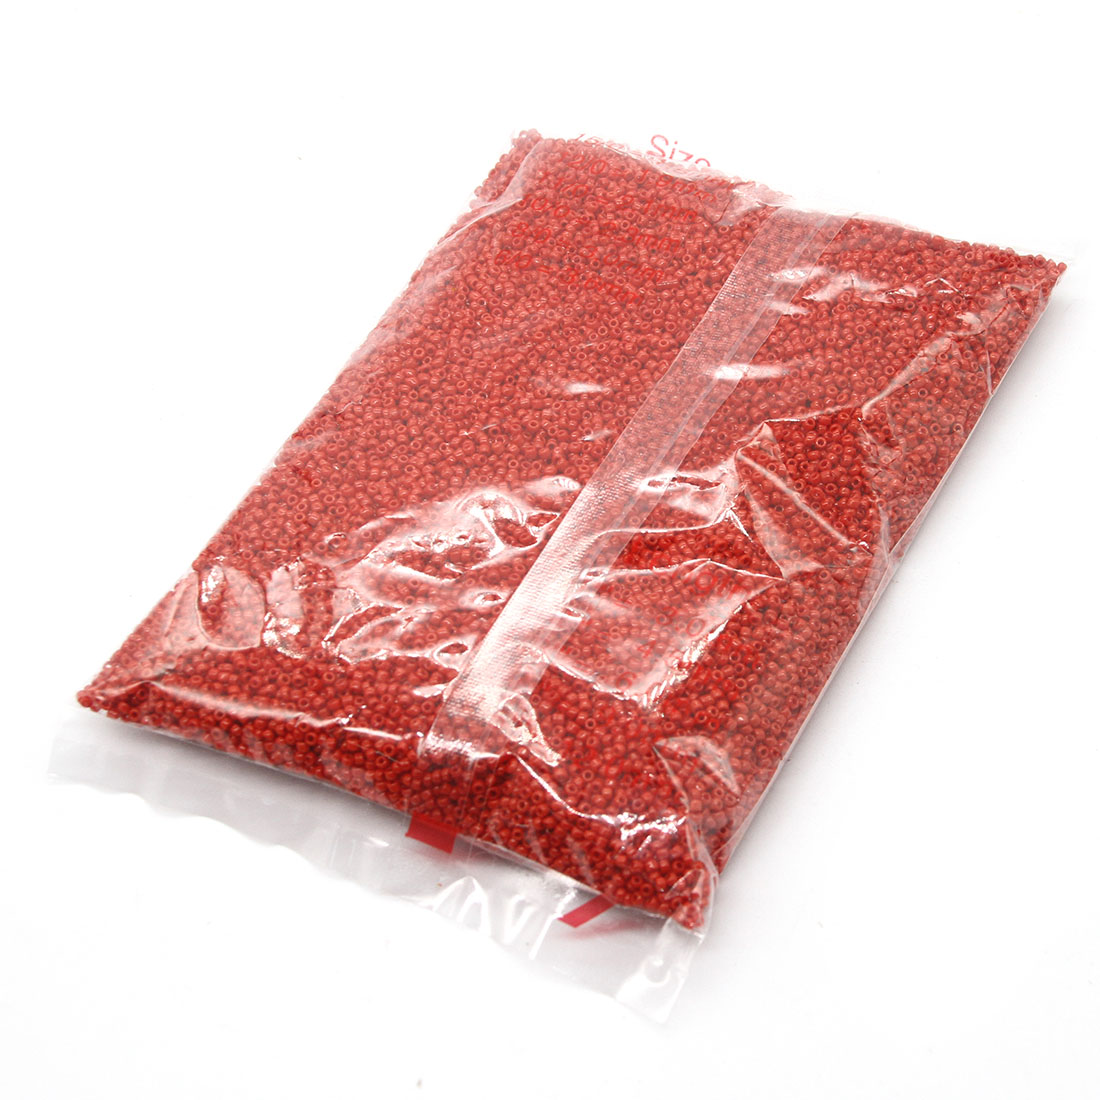 Red blood 4mm 4500 packs